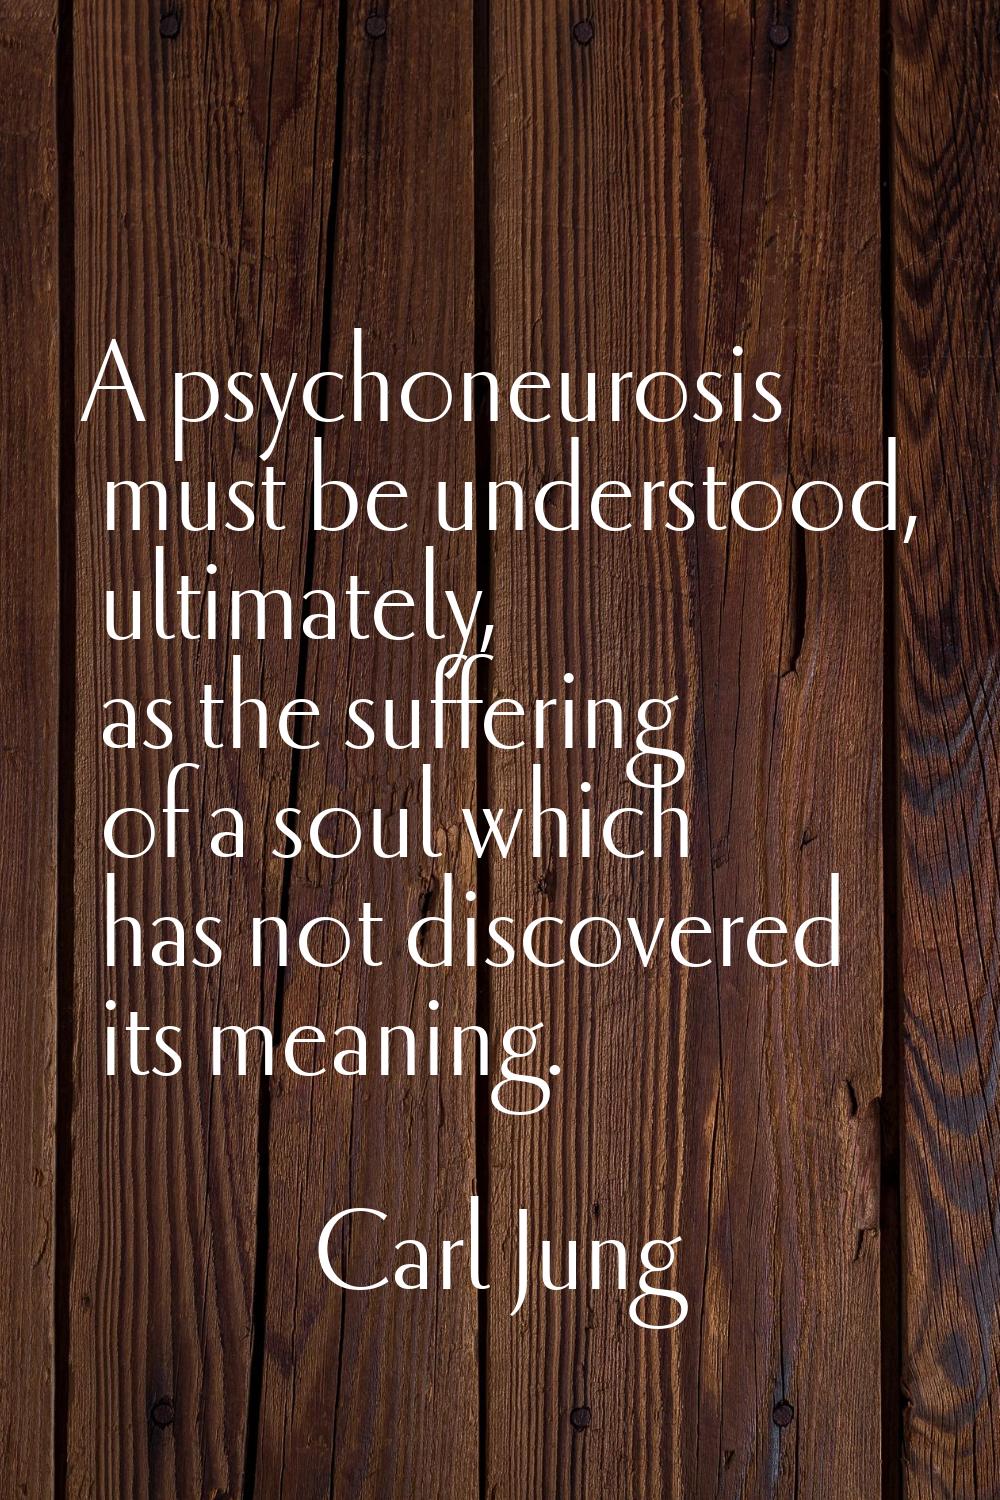 A psychoneurosis must be understood, ultimately, as the suffering of a soul which has not discovere